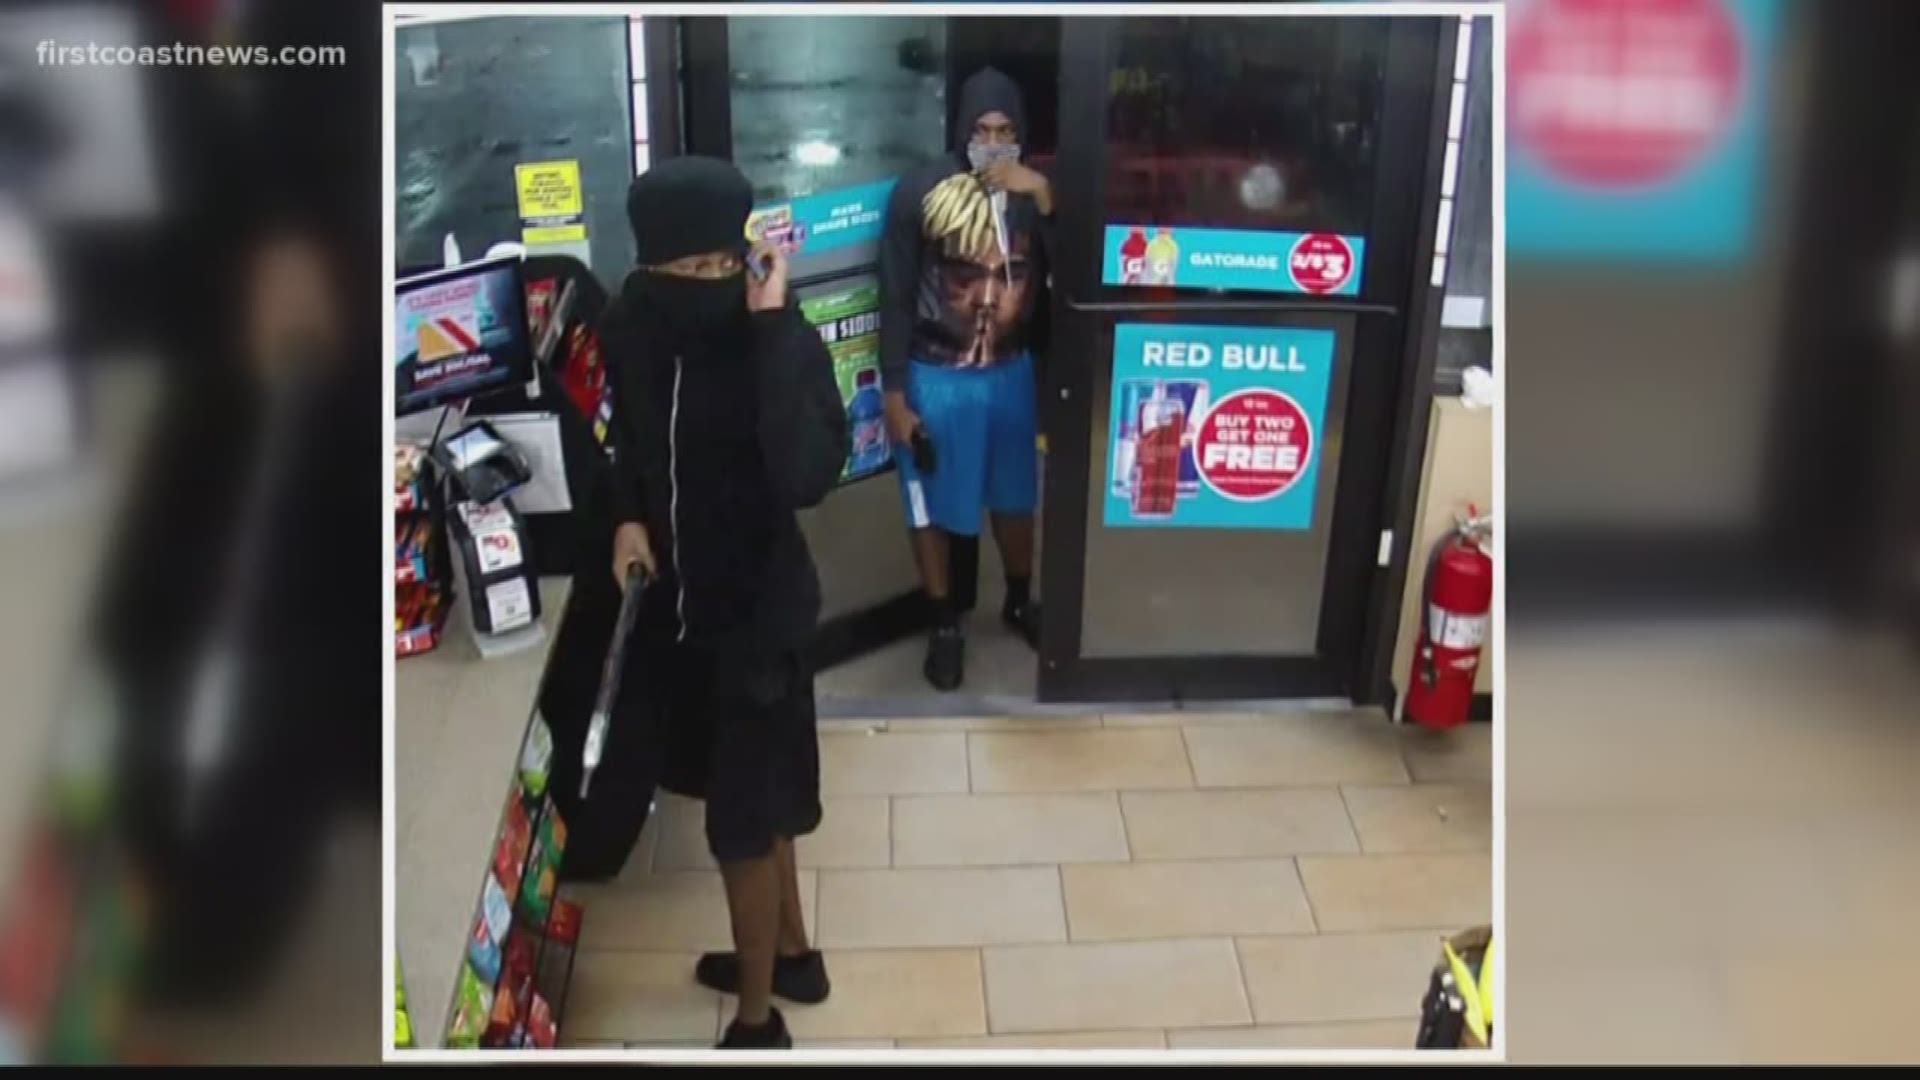 JSO said two men entered the Circle K located at 2615 S. St. Johns Bluff Road around 10:55 p.m. and demanded money from the clerk.